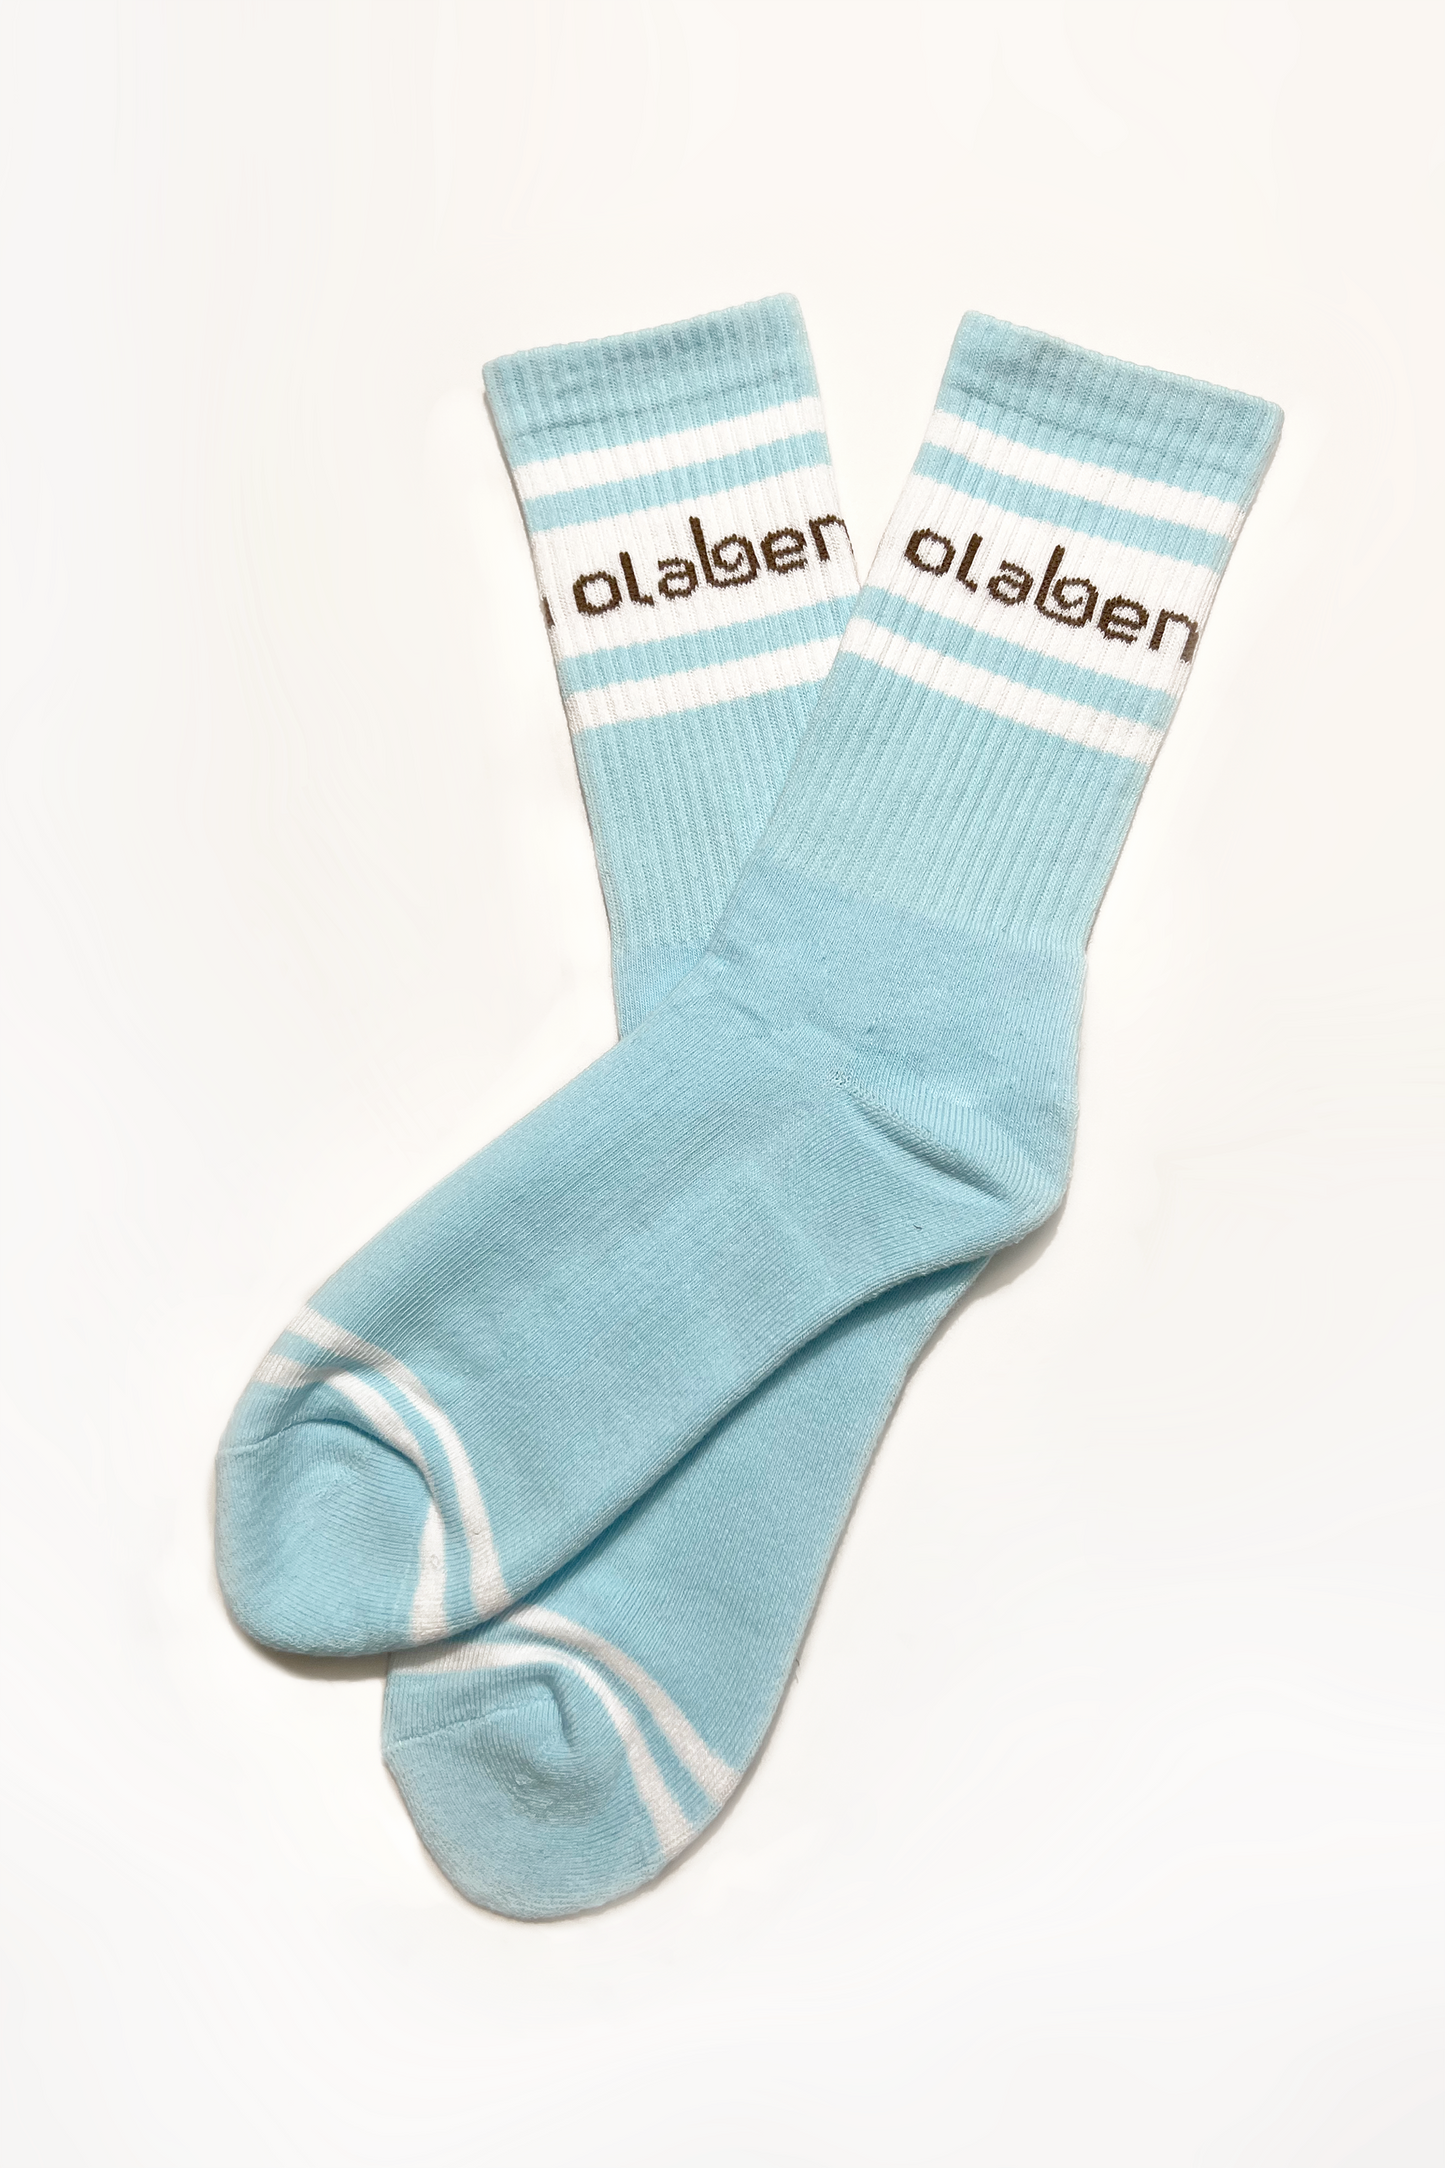 Colorful assortment of cozy quarter socks in ice blue, perfect for a stylish look.